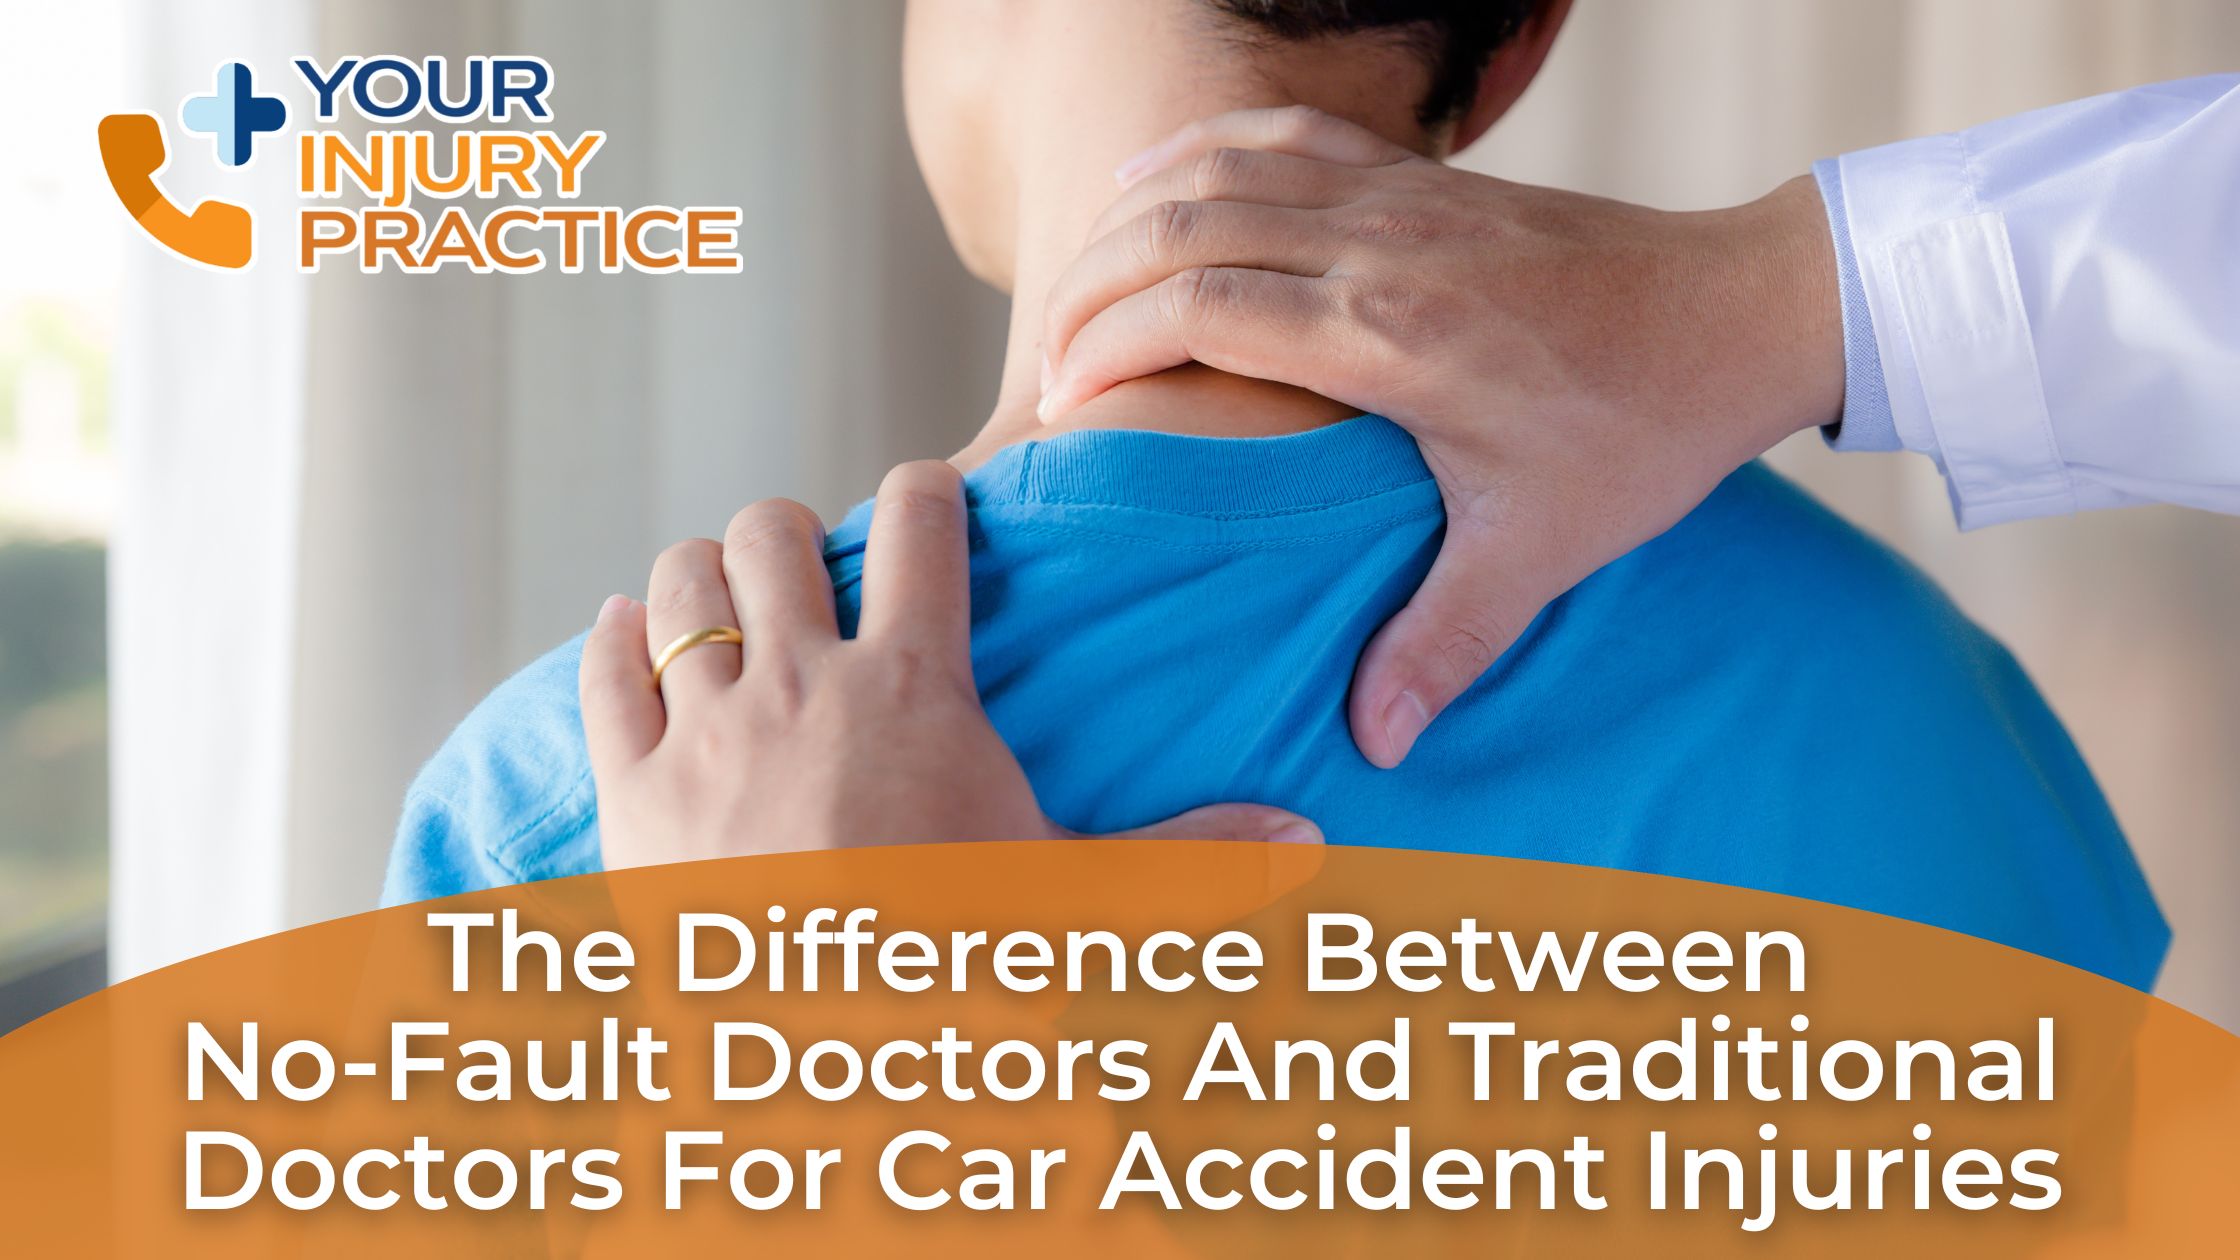 The Difference Between No-Fault Doctors and Traditional Doctors for Car Accident Injuries